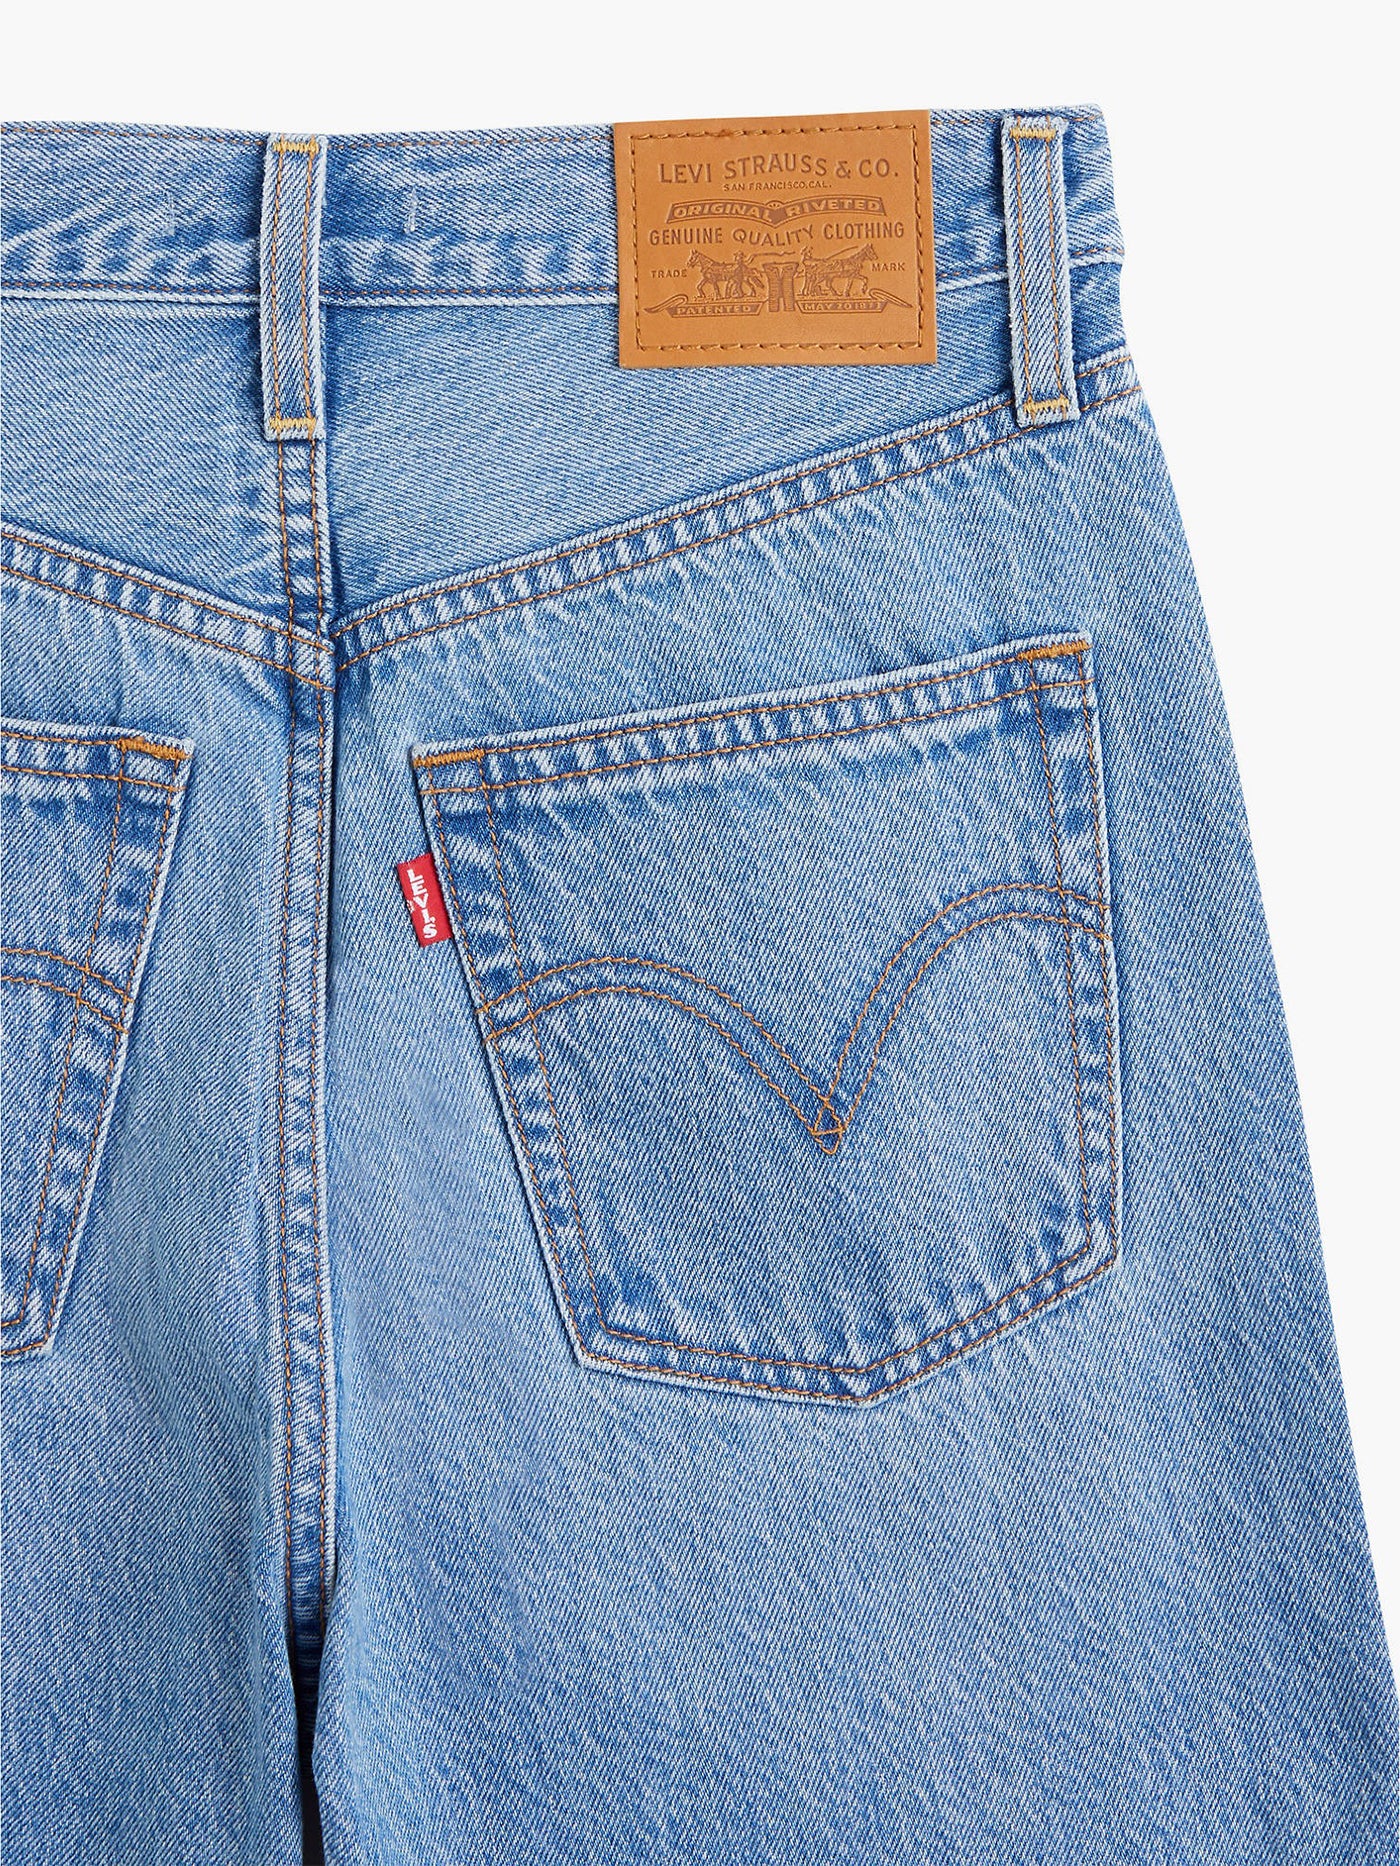 Levis Ribcage Straight Ankle Light Indigo Worn In Jeans